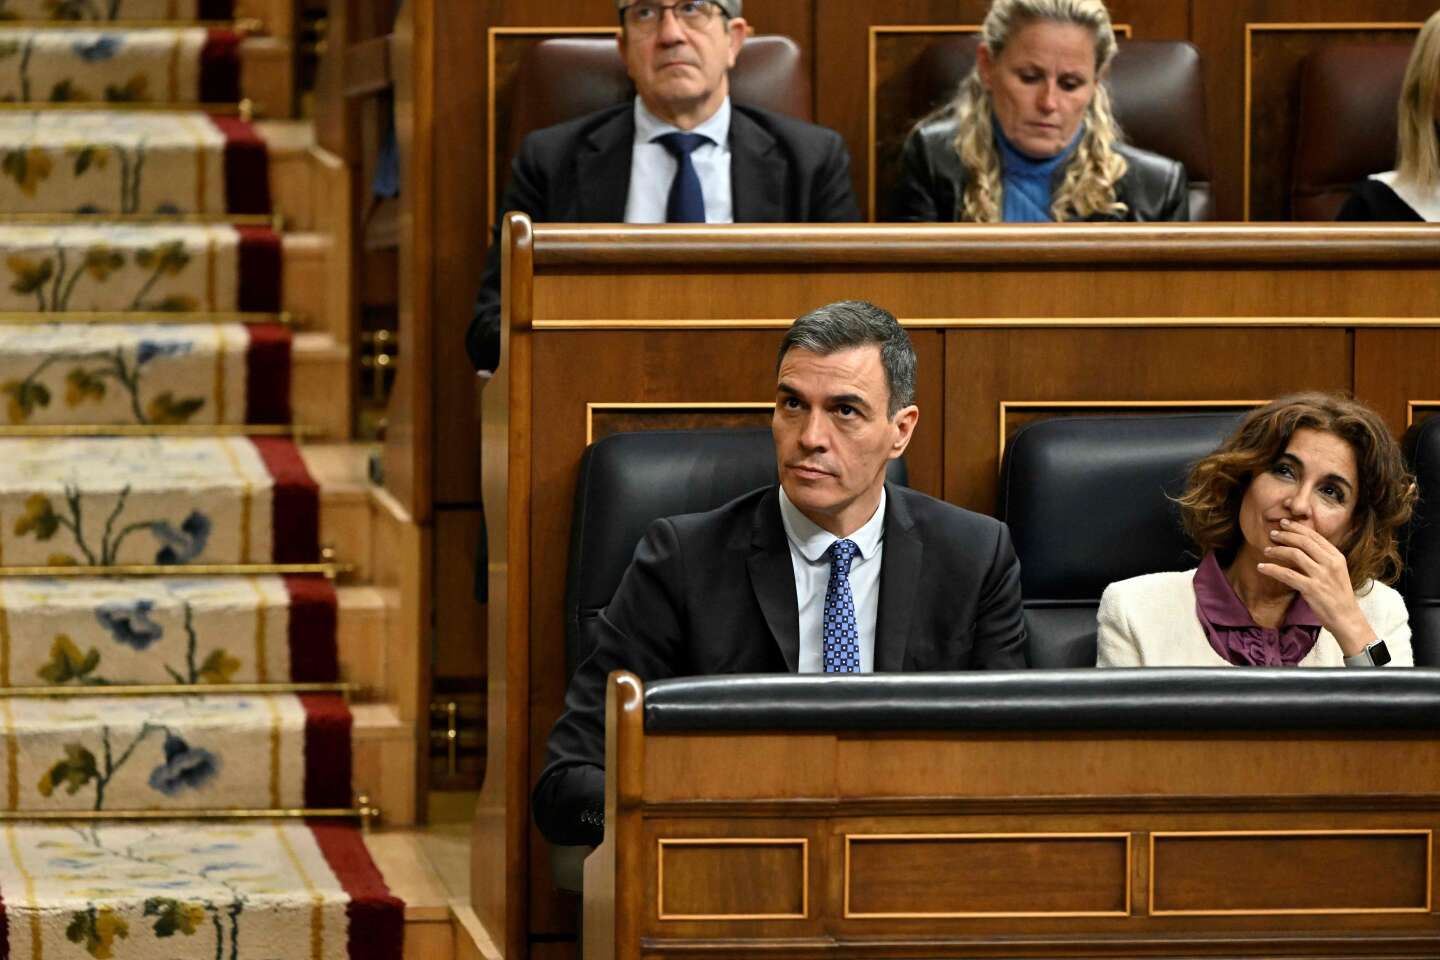 In Spain, representatives rejected in the first reading the draft amnesty bill for Catalan separatists